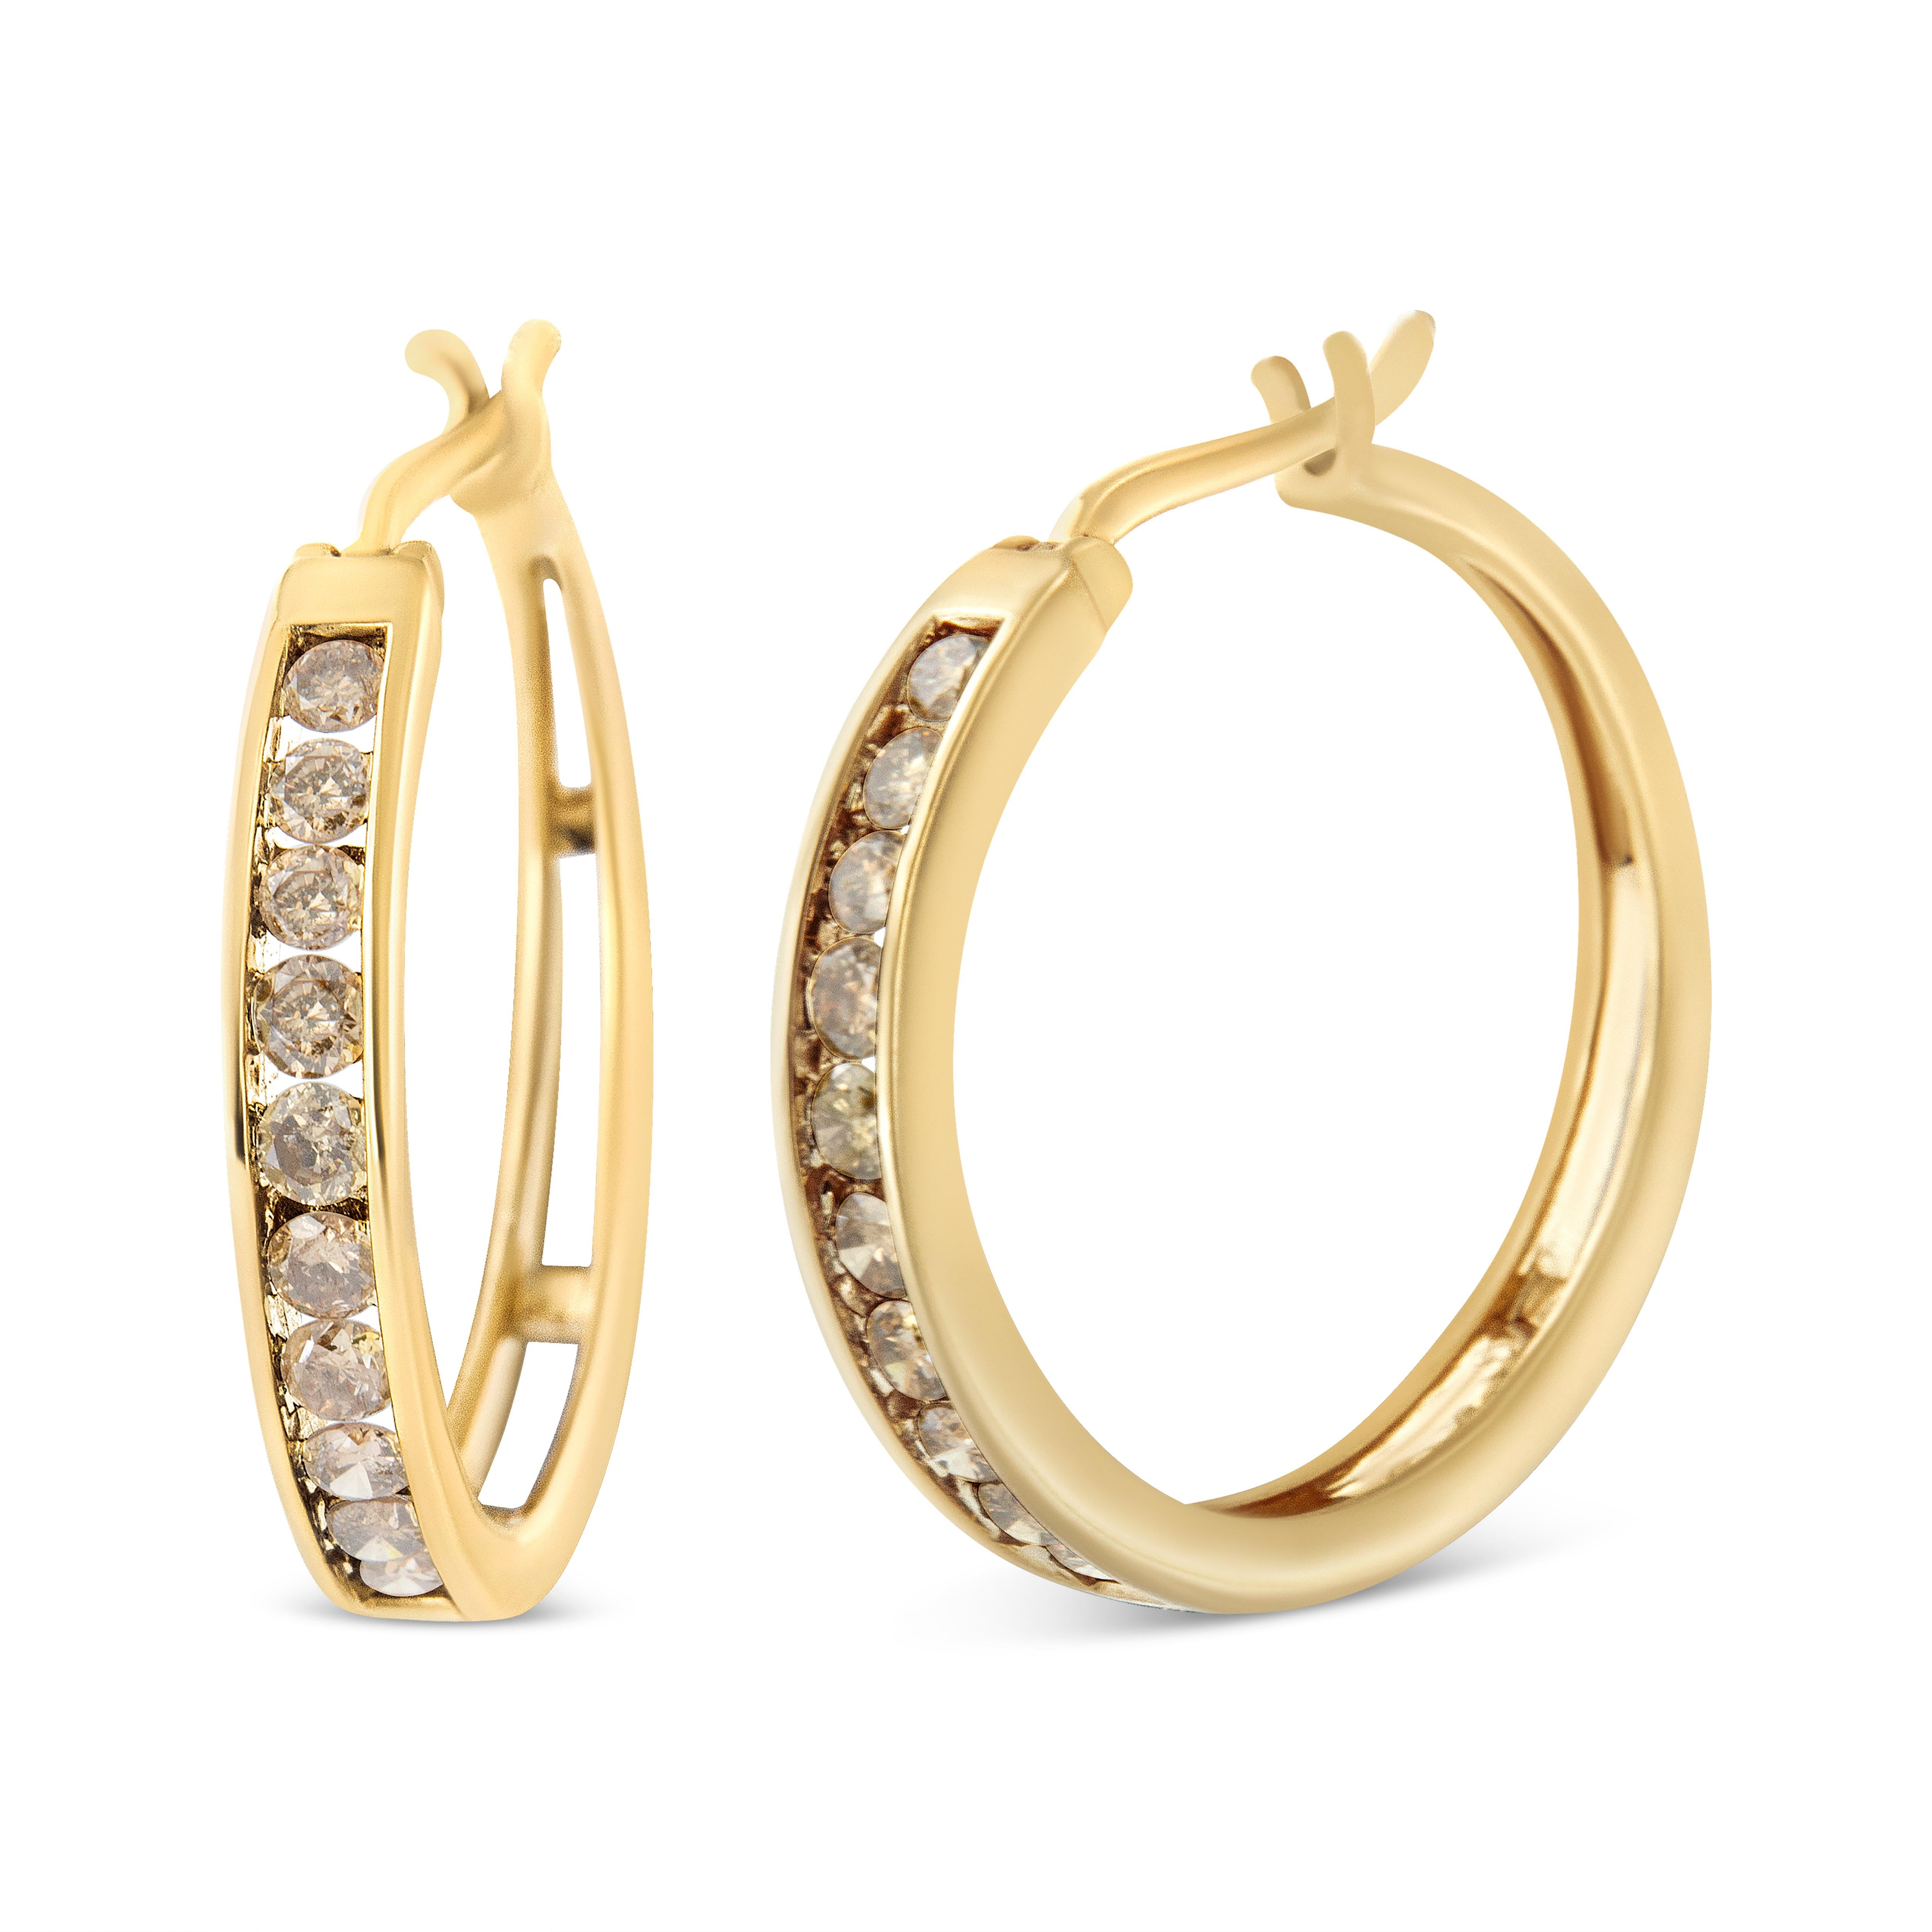 Modern and elegant, these glamorous hoops are created in sparkling 14kt yellow gold plated 925 sterling silver. The outer part of these earrings are beautifully set with champagne color diamonds in classic shared prong settings. The diamonds are